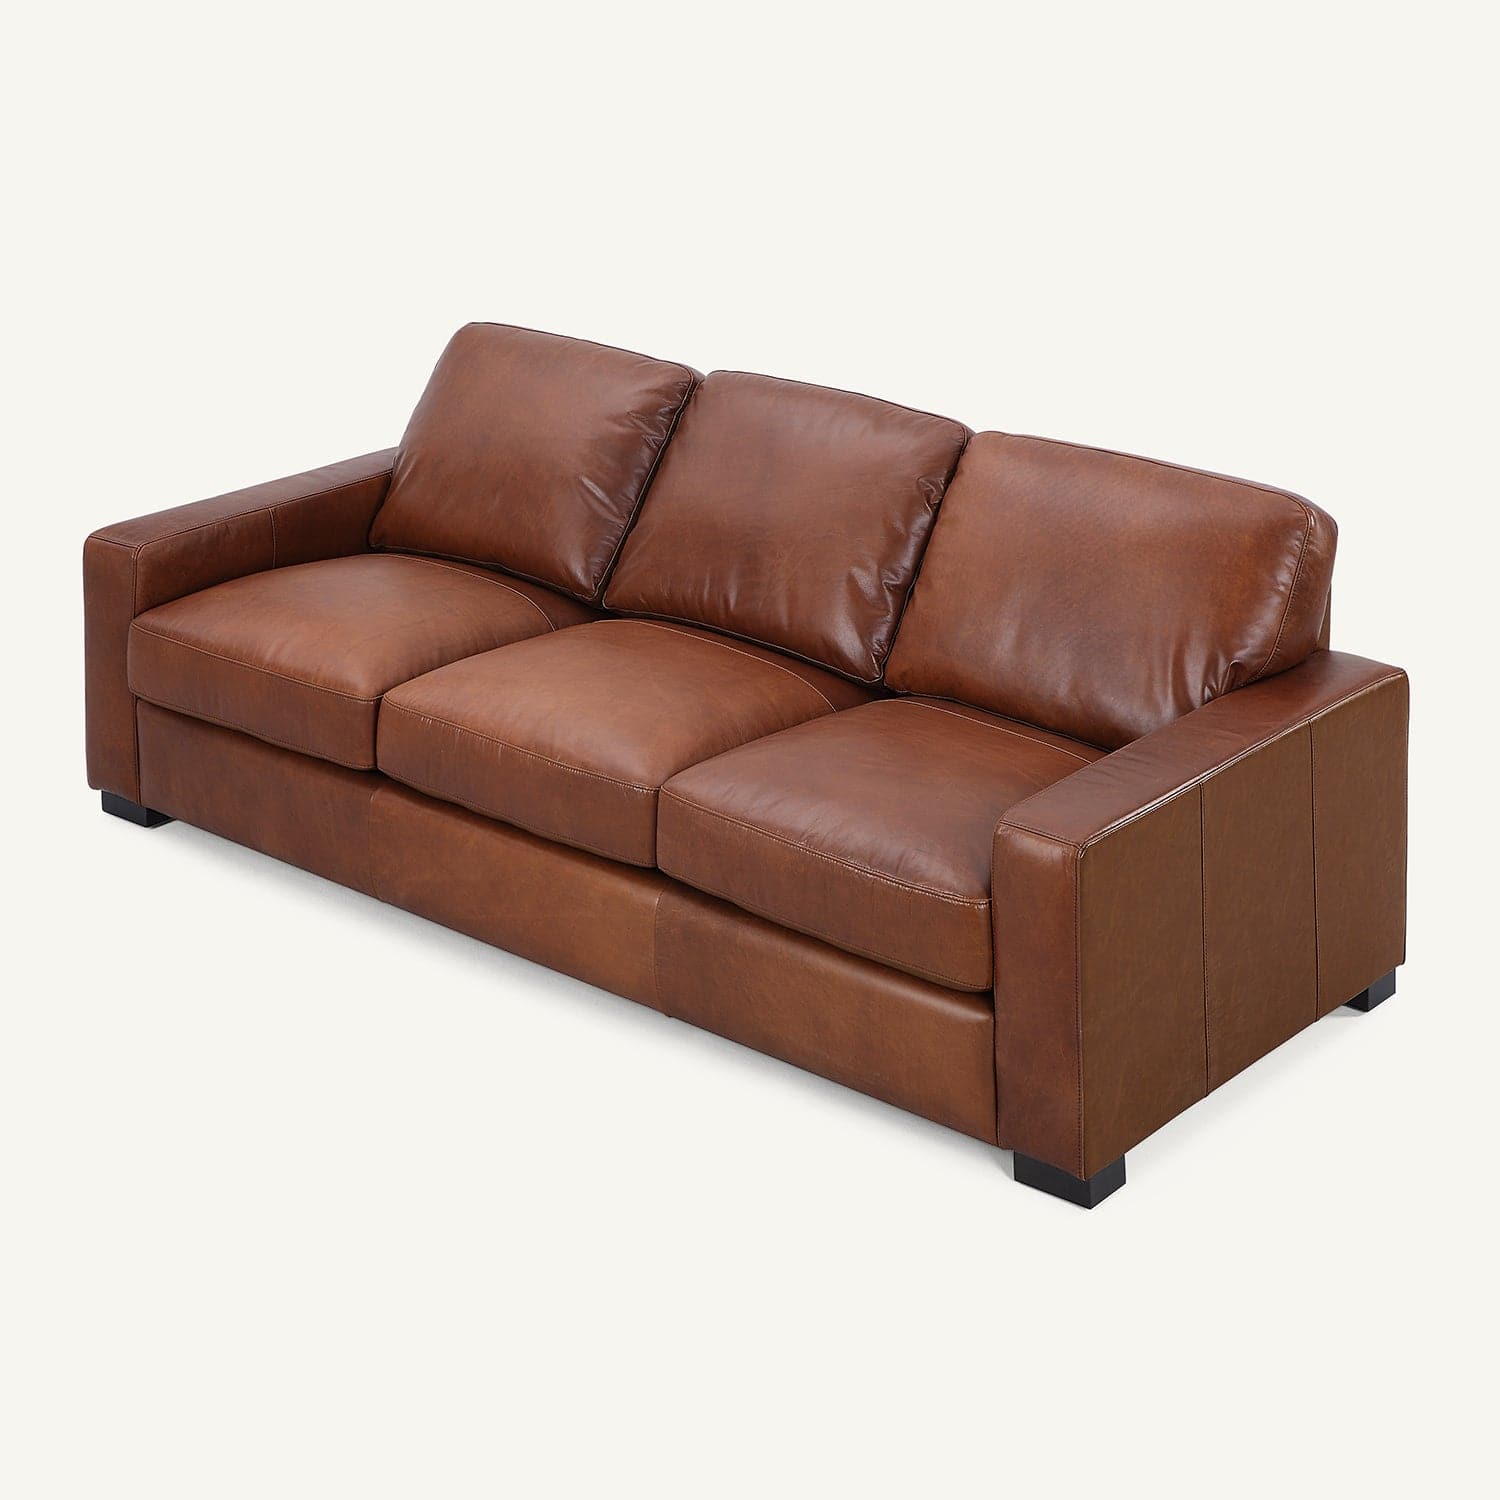 Randall Chestnut Brown Oil Wax Leather 3 Pieces Living Room Sofa Set